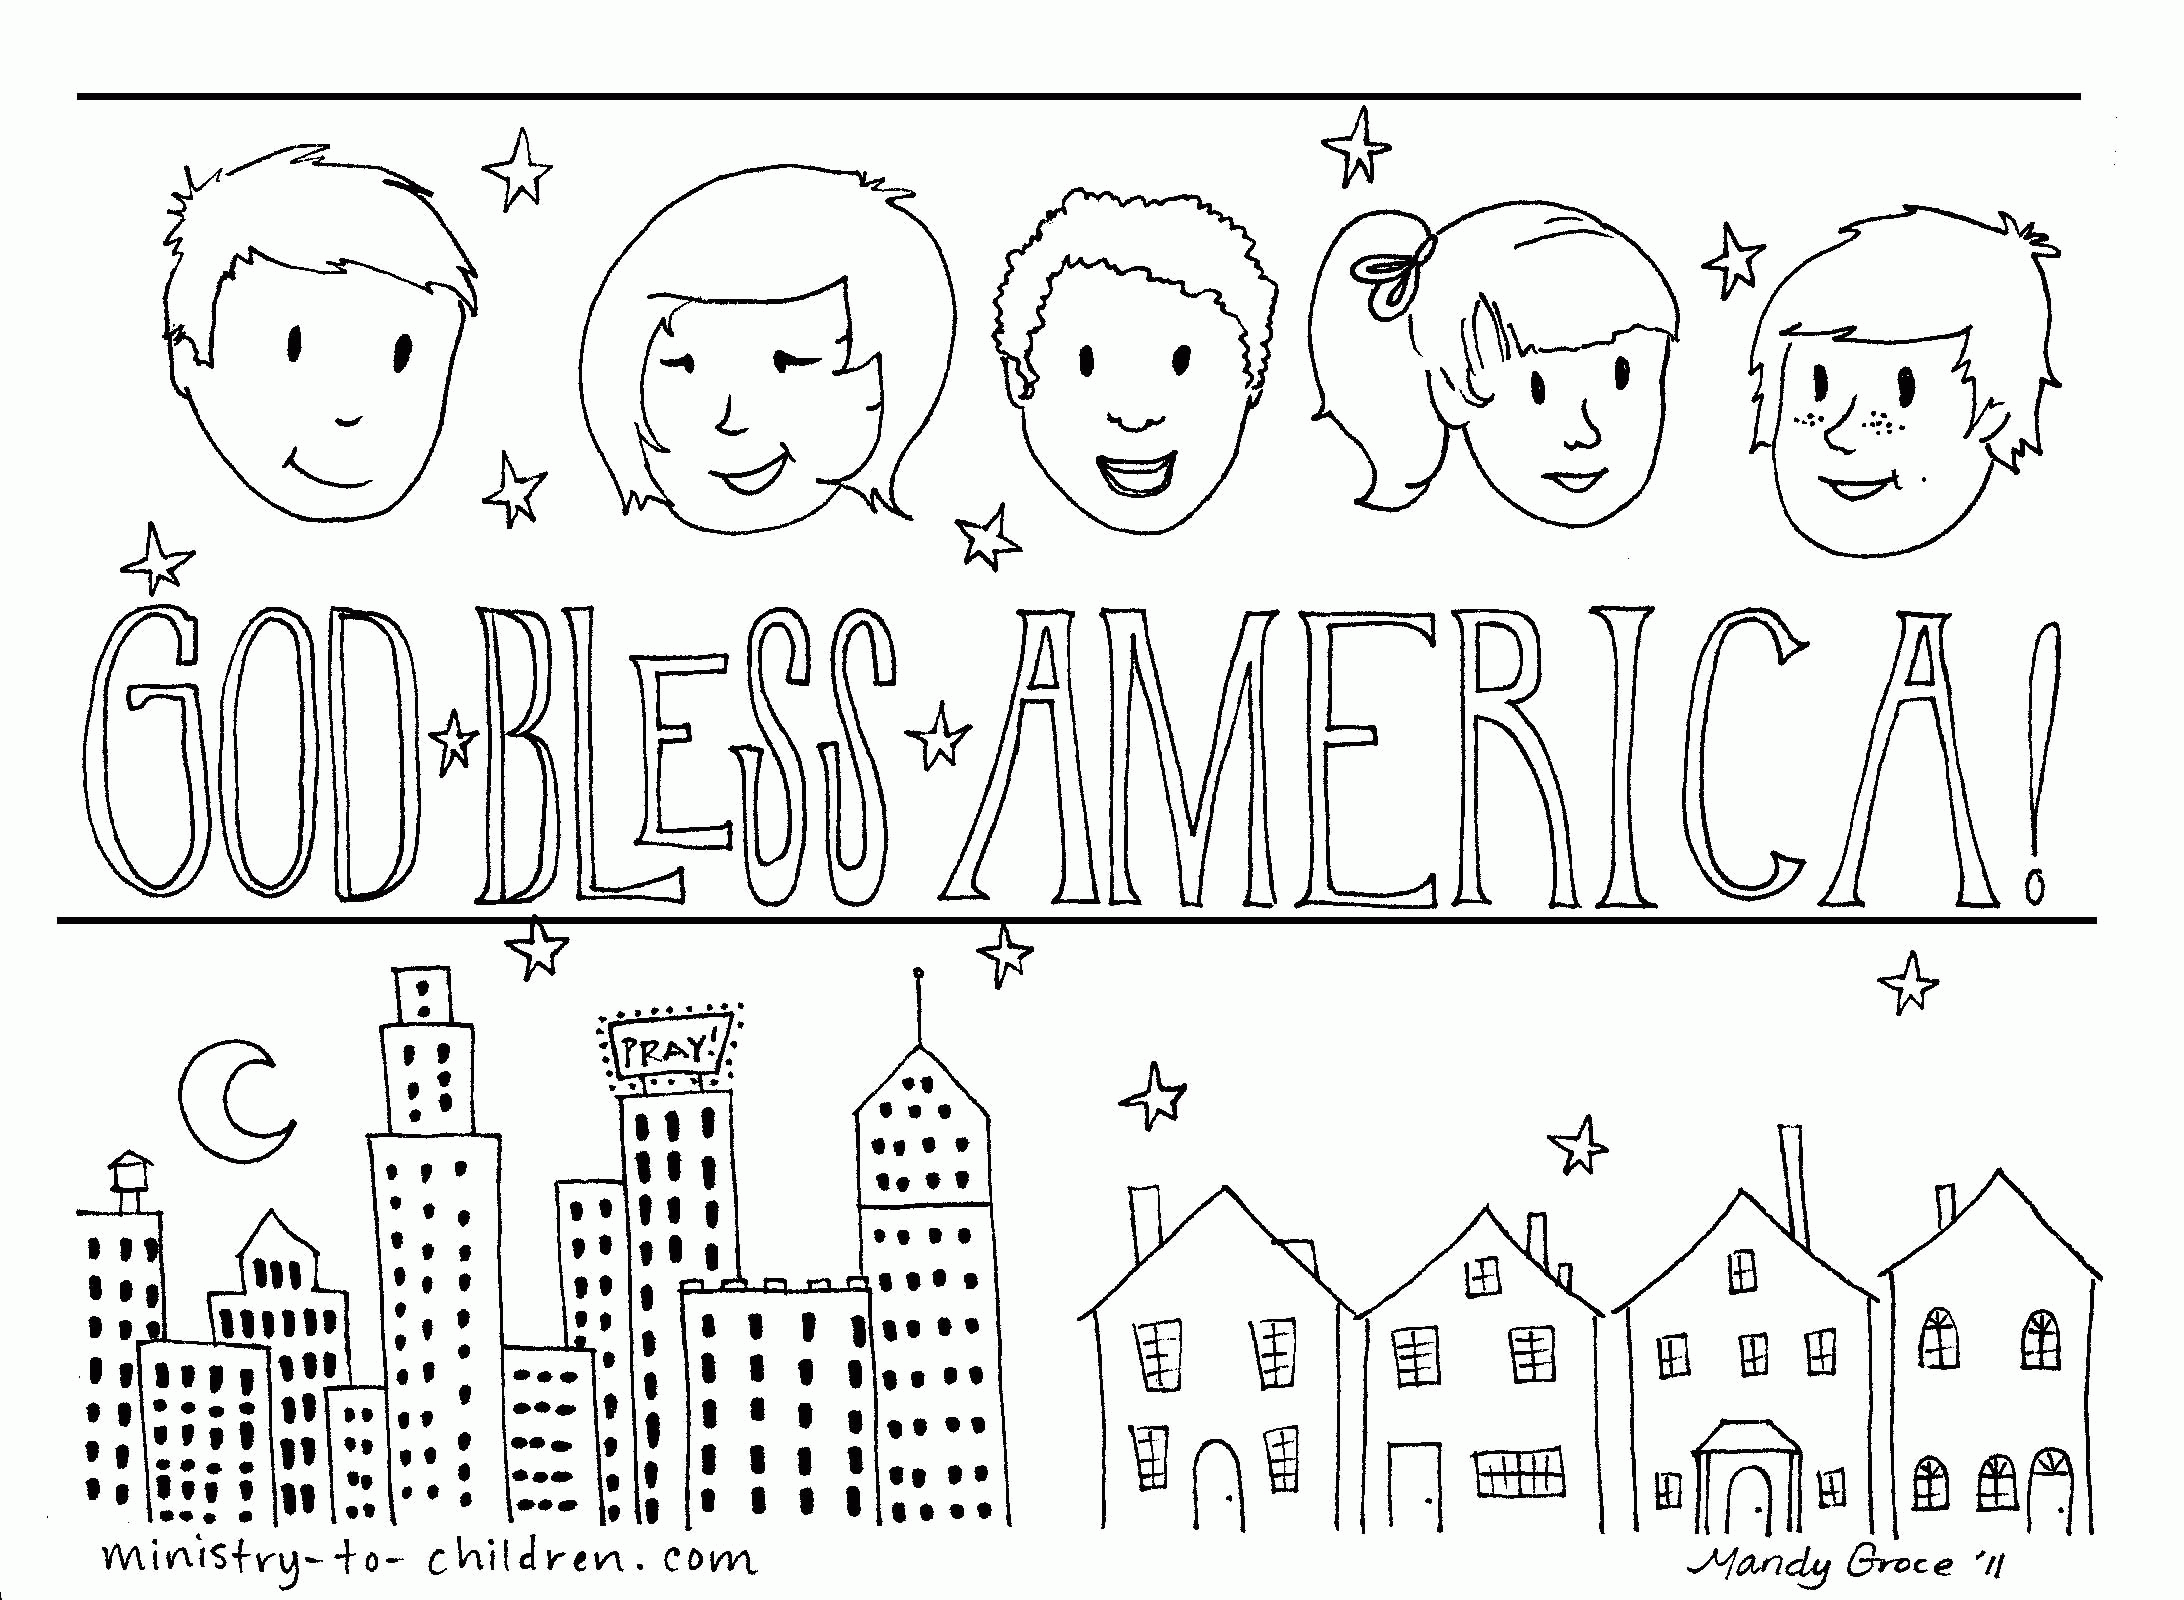 God Bless America" Coloring Page